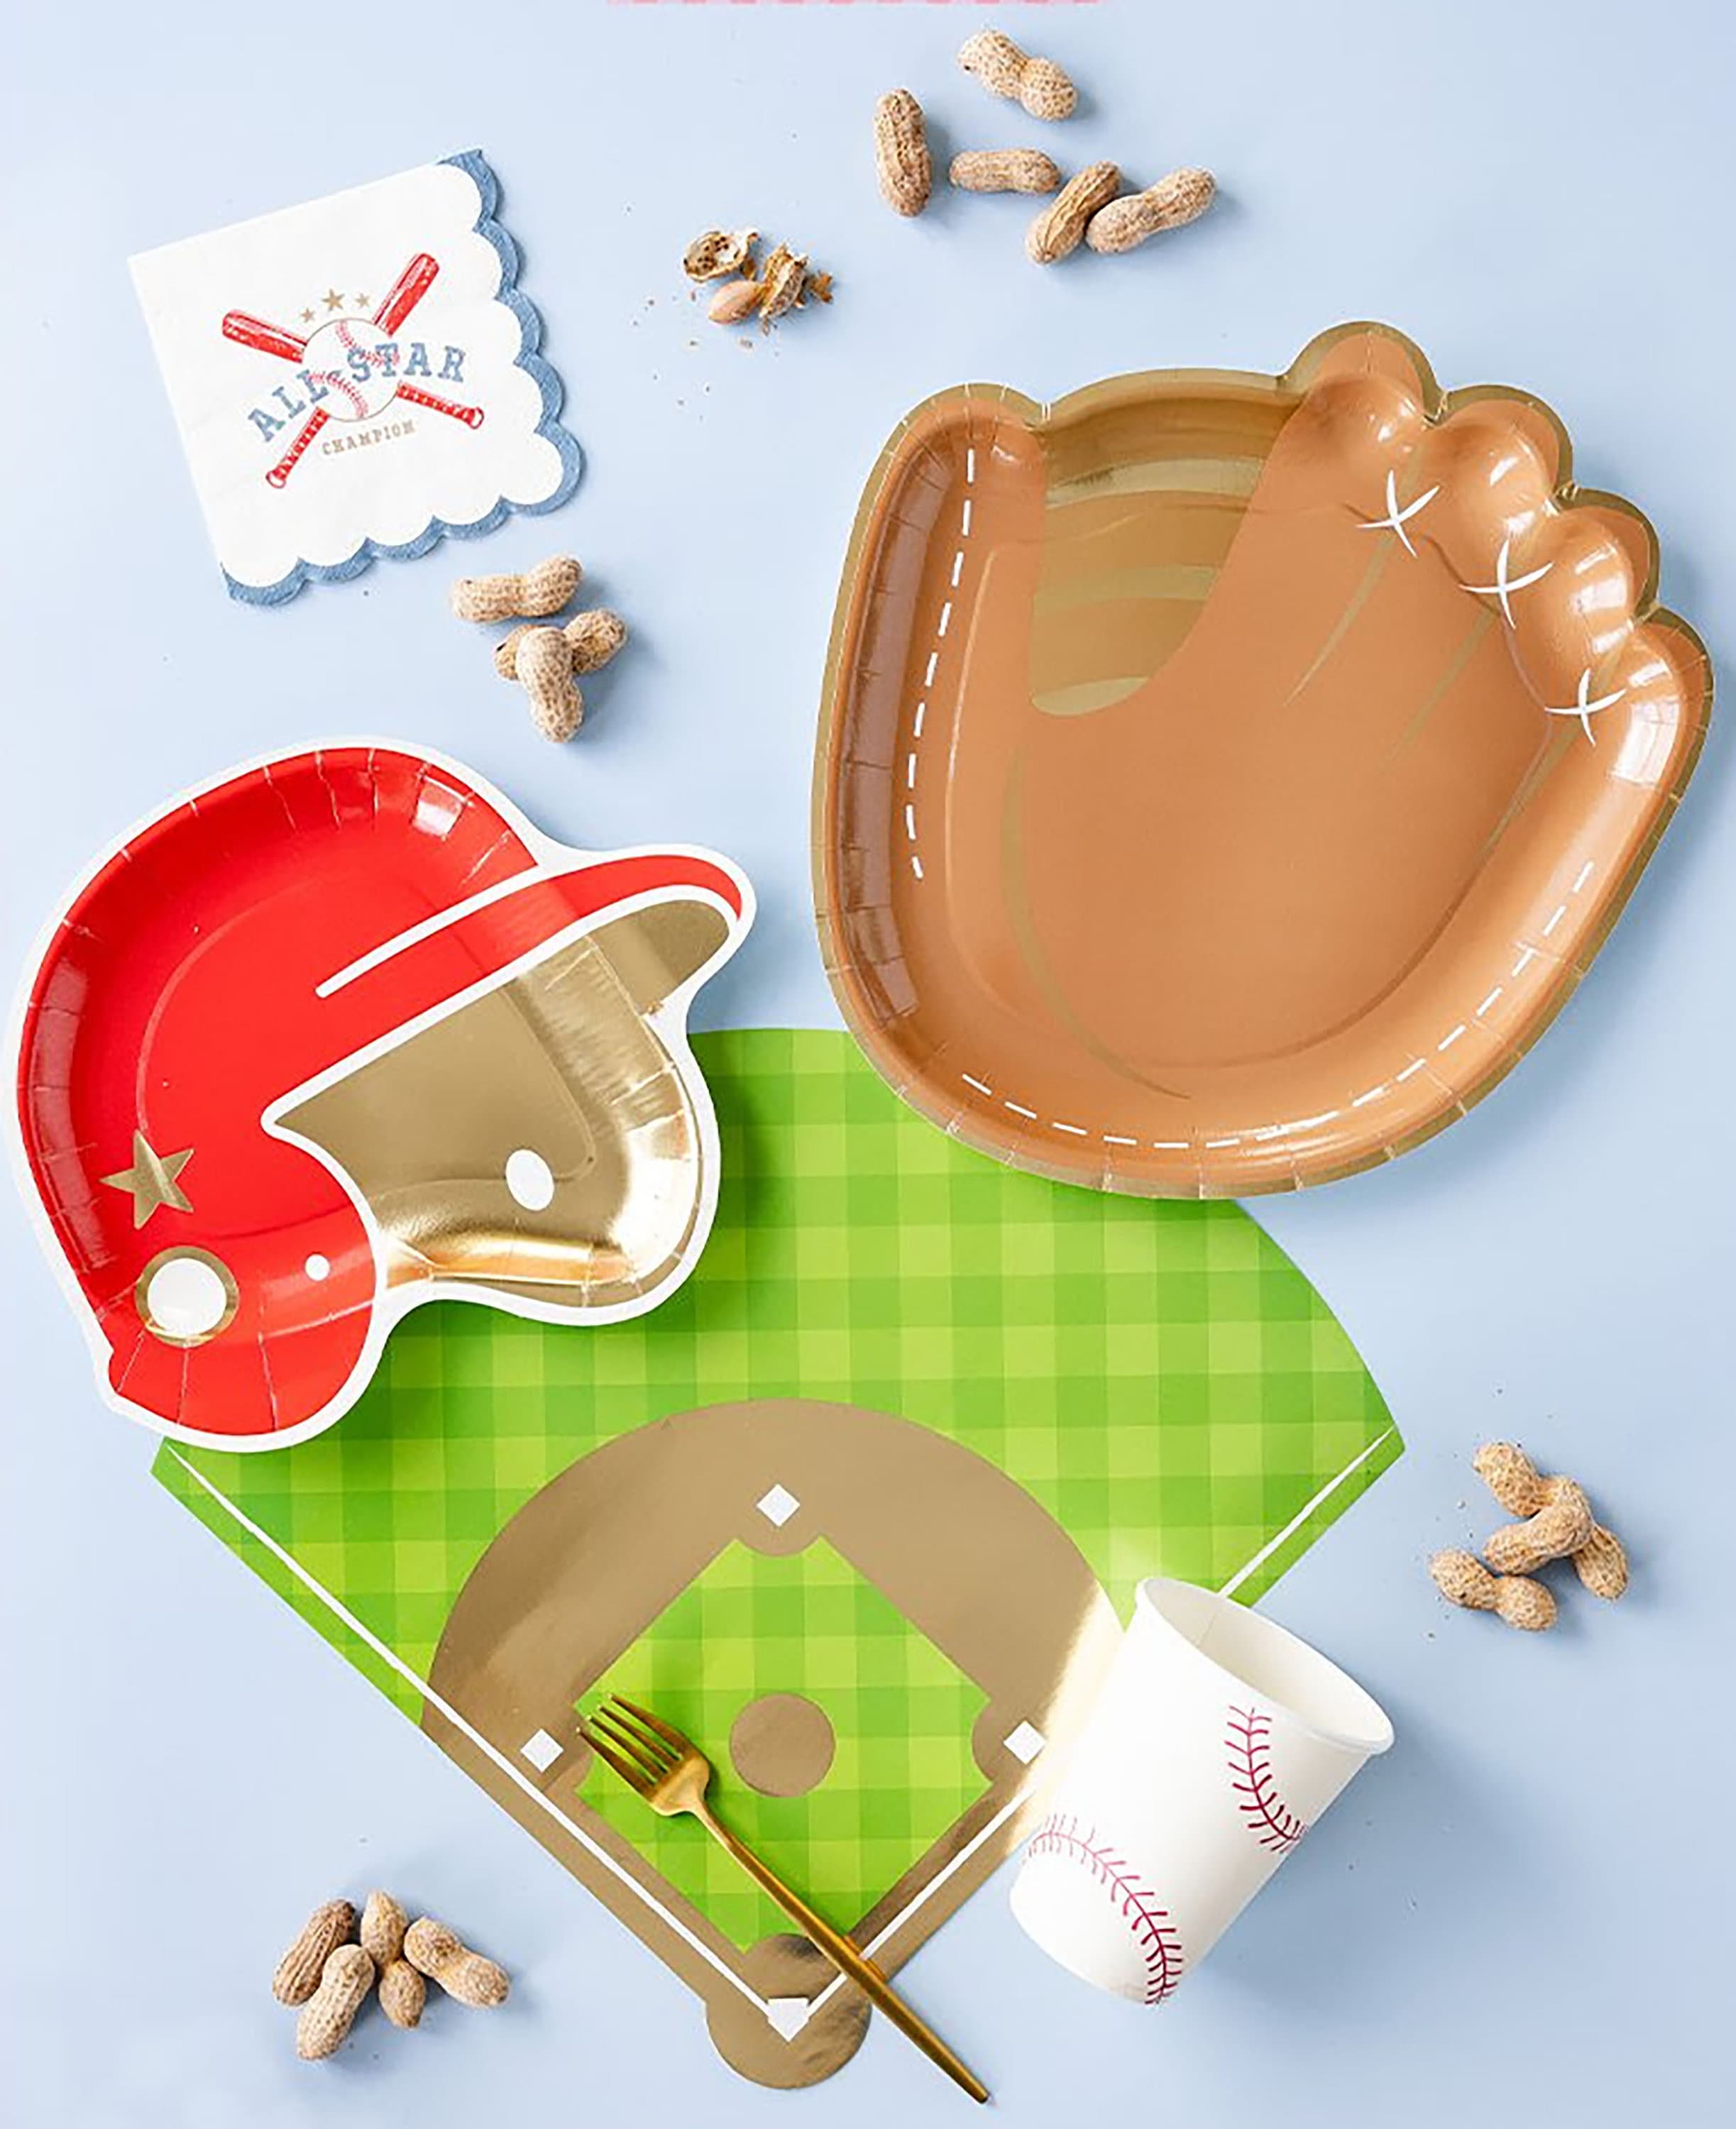 Baseball Birthday Party Plates - for Fun Sports Theme Birthday Parties & Winning Game Days - Set of 8